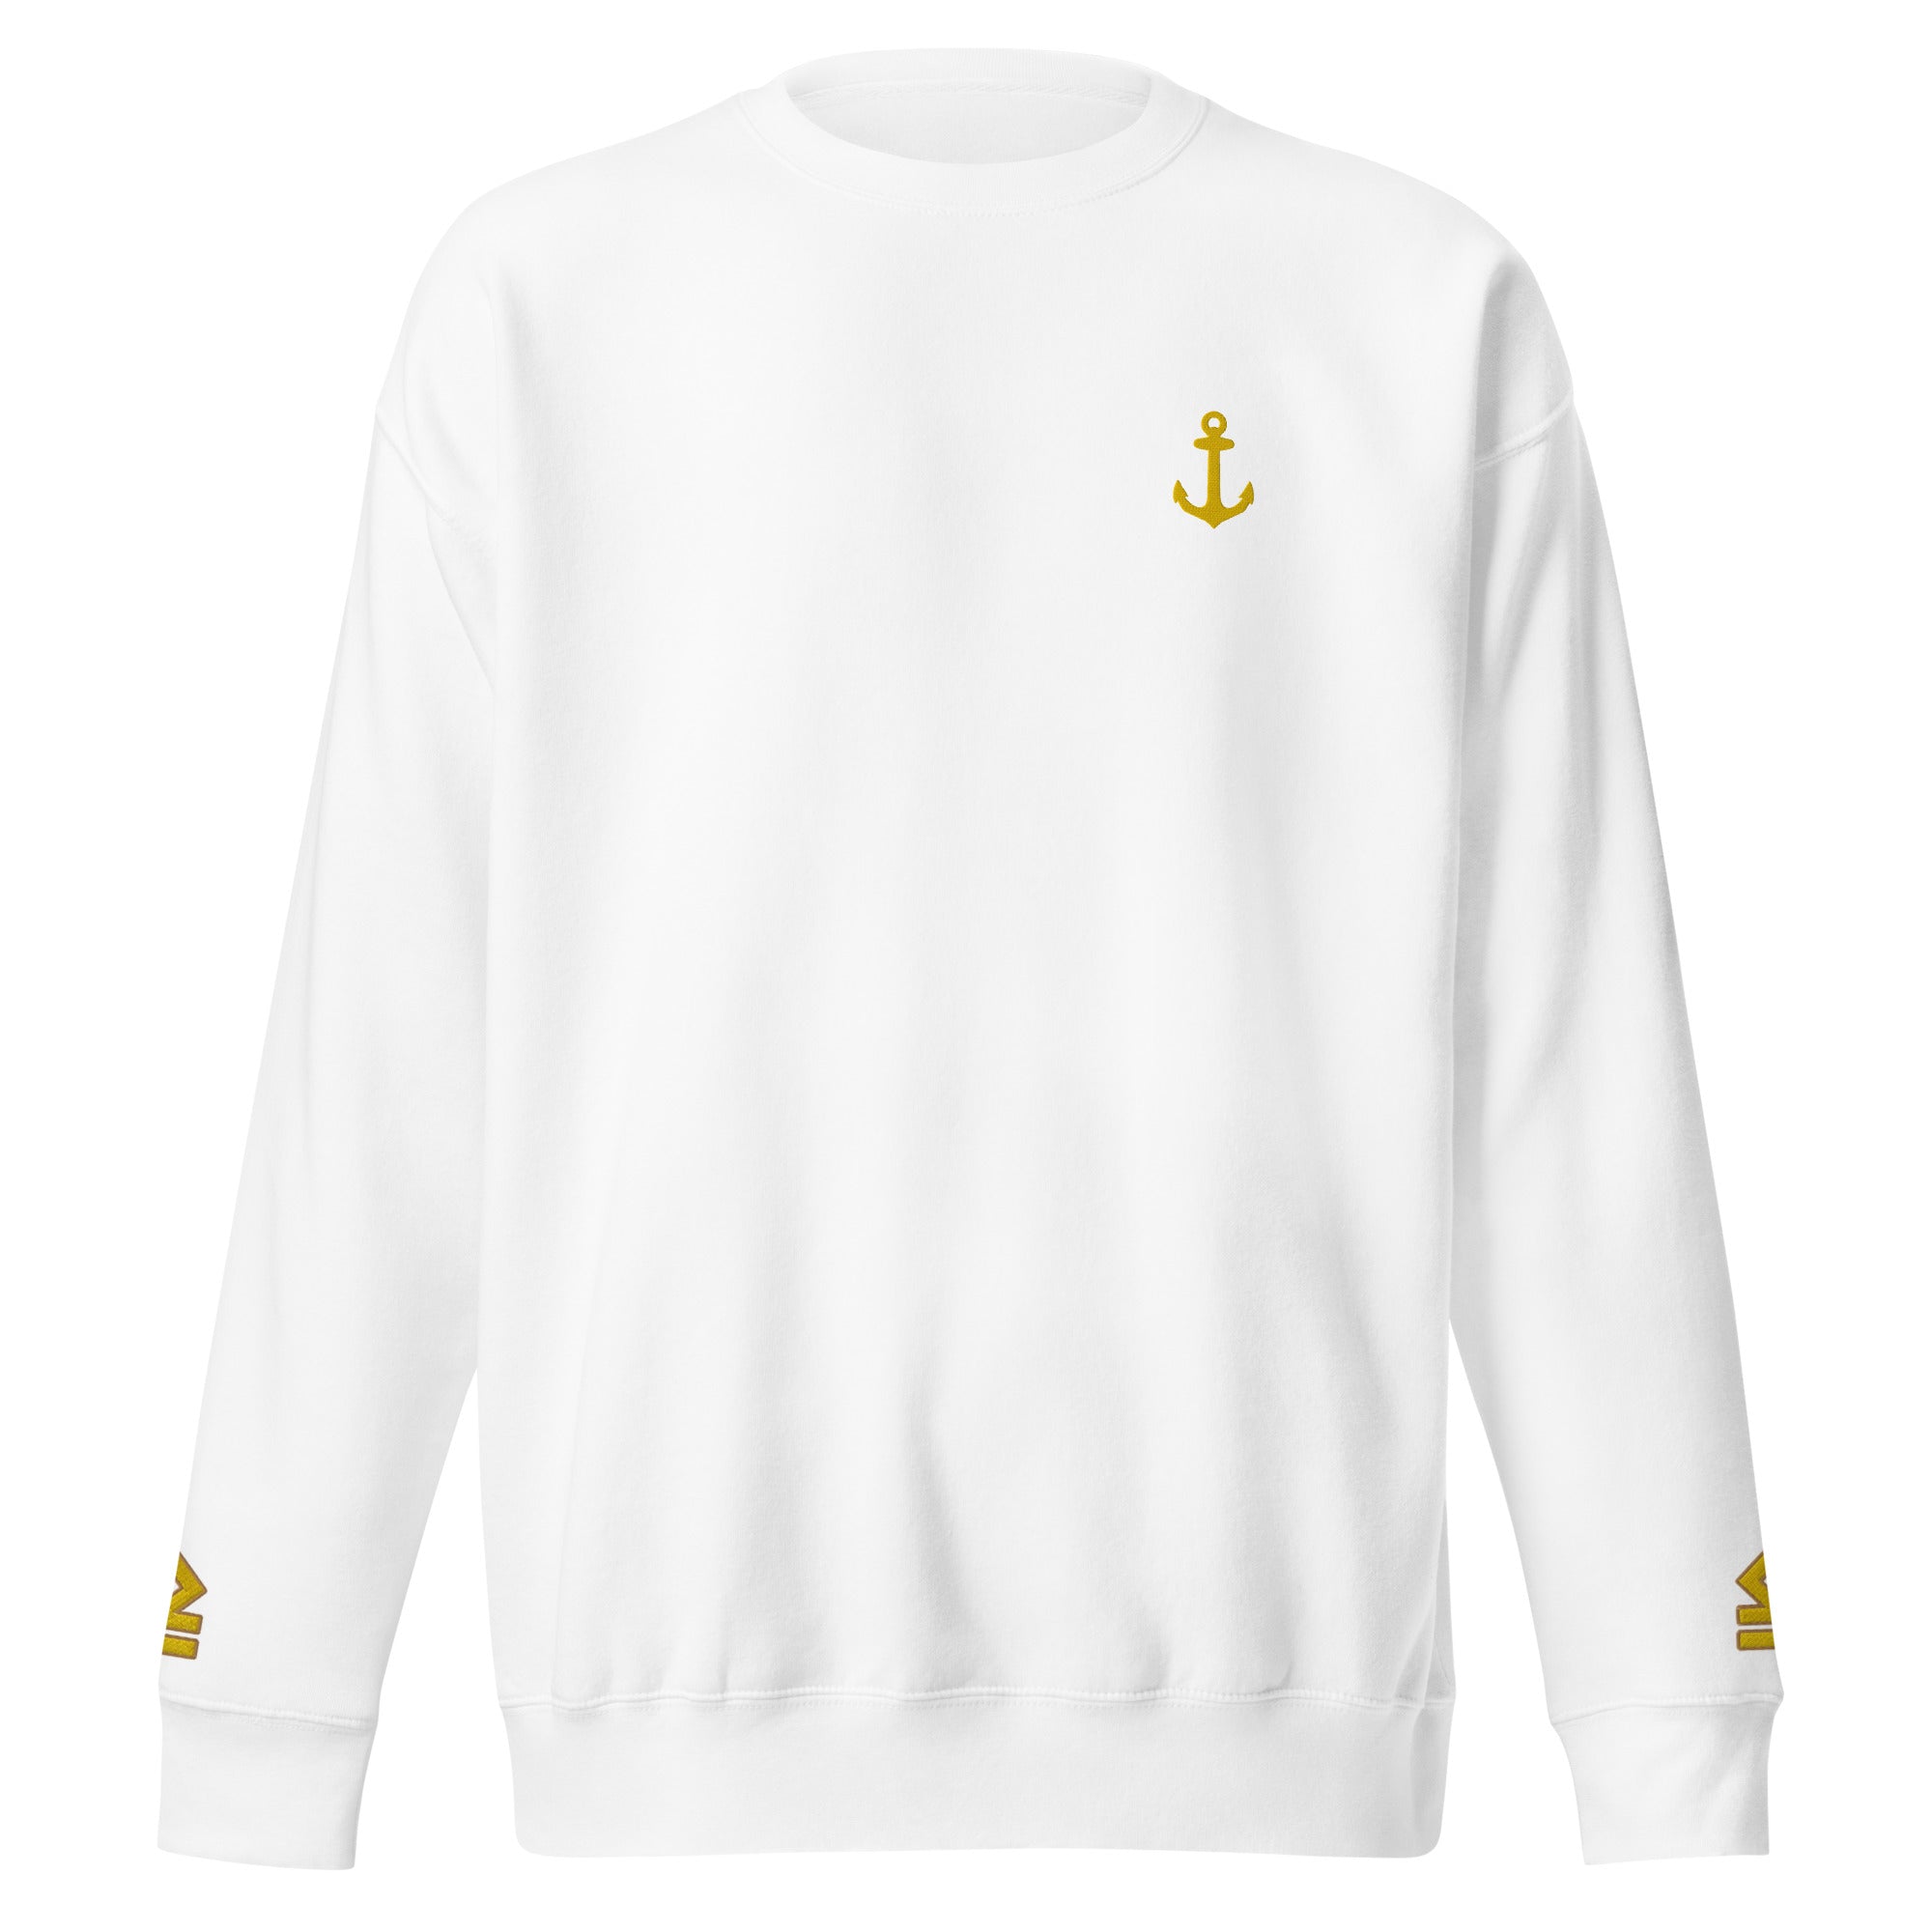 2OFF Sweatshirt left chest and sleeves embroidery (Choose epaulettes style)